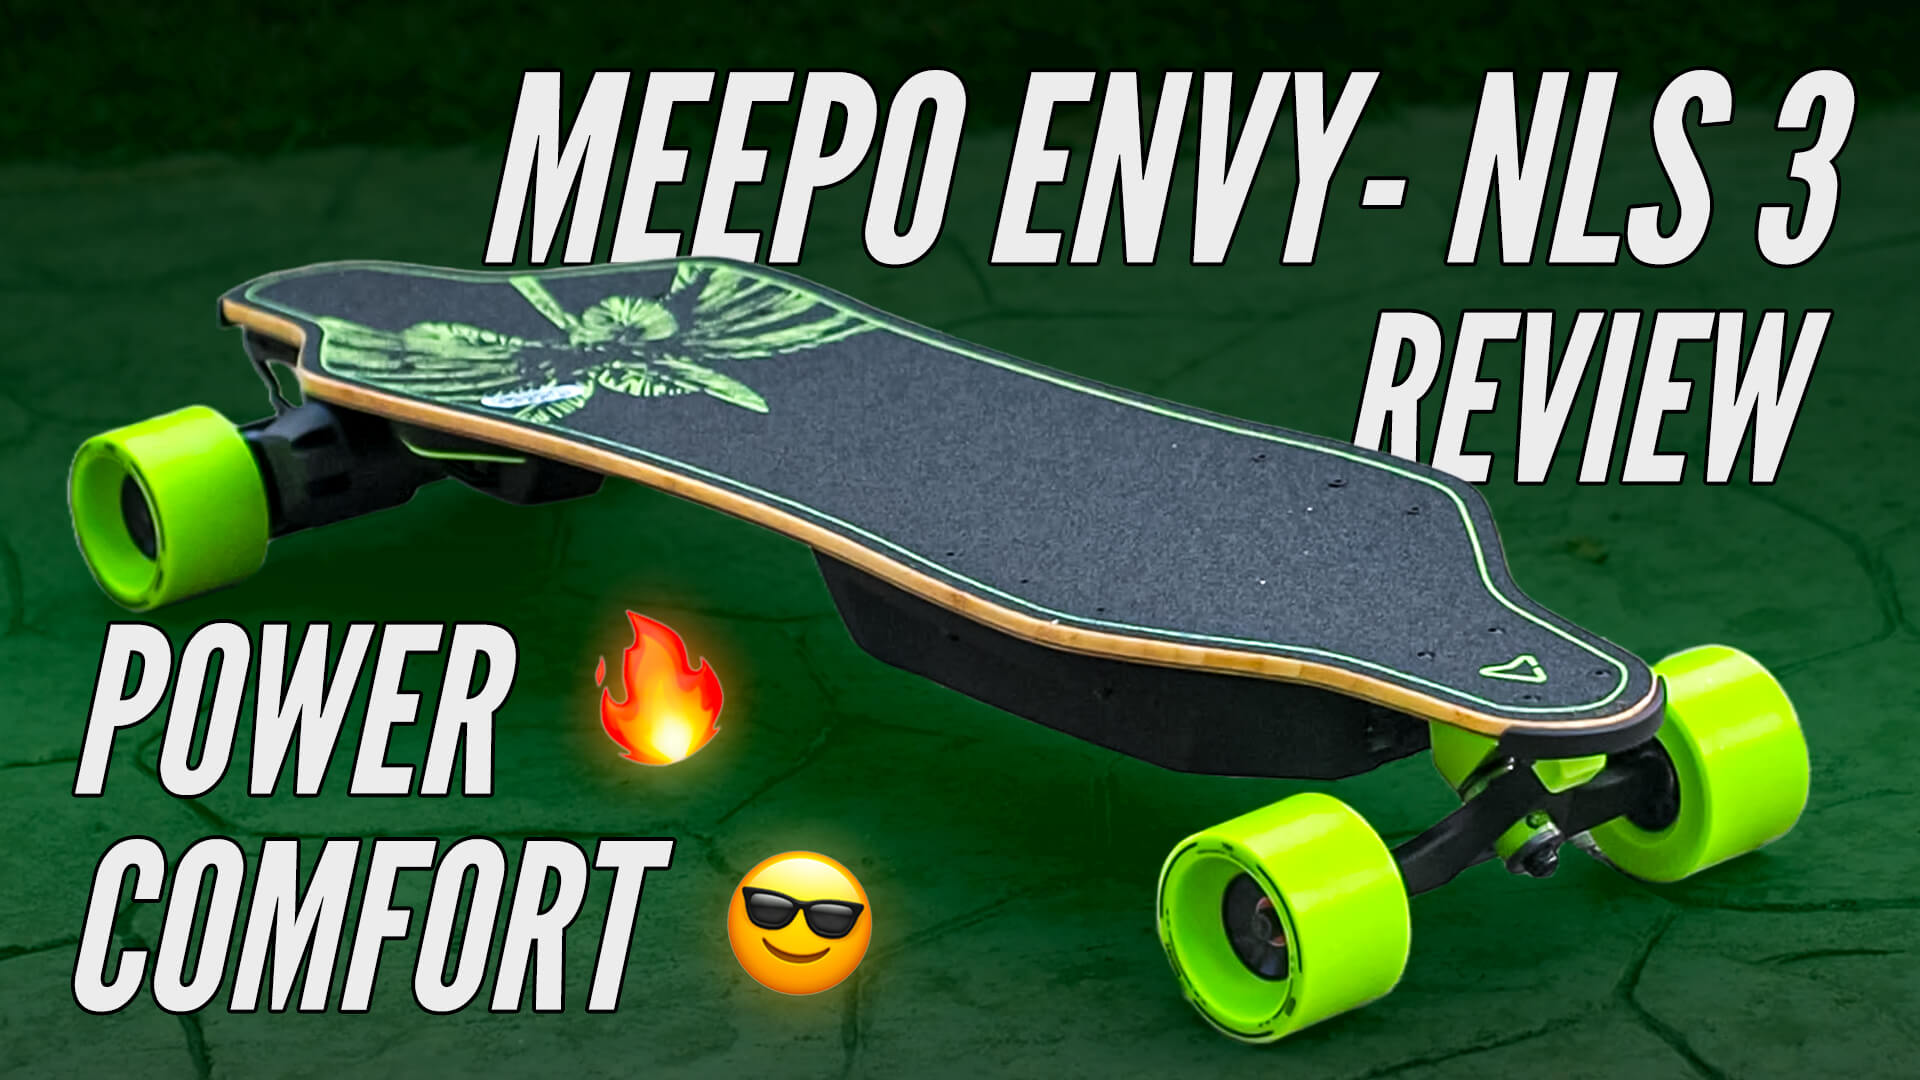 The Meepo NLS 3 Review: Power, but not Only!